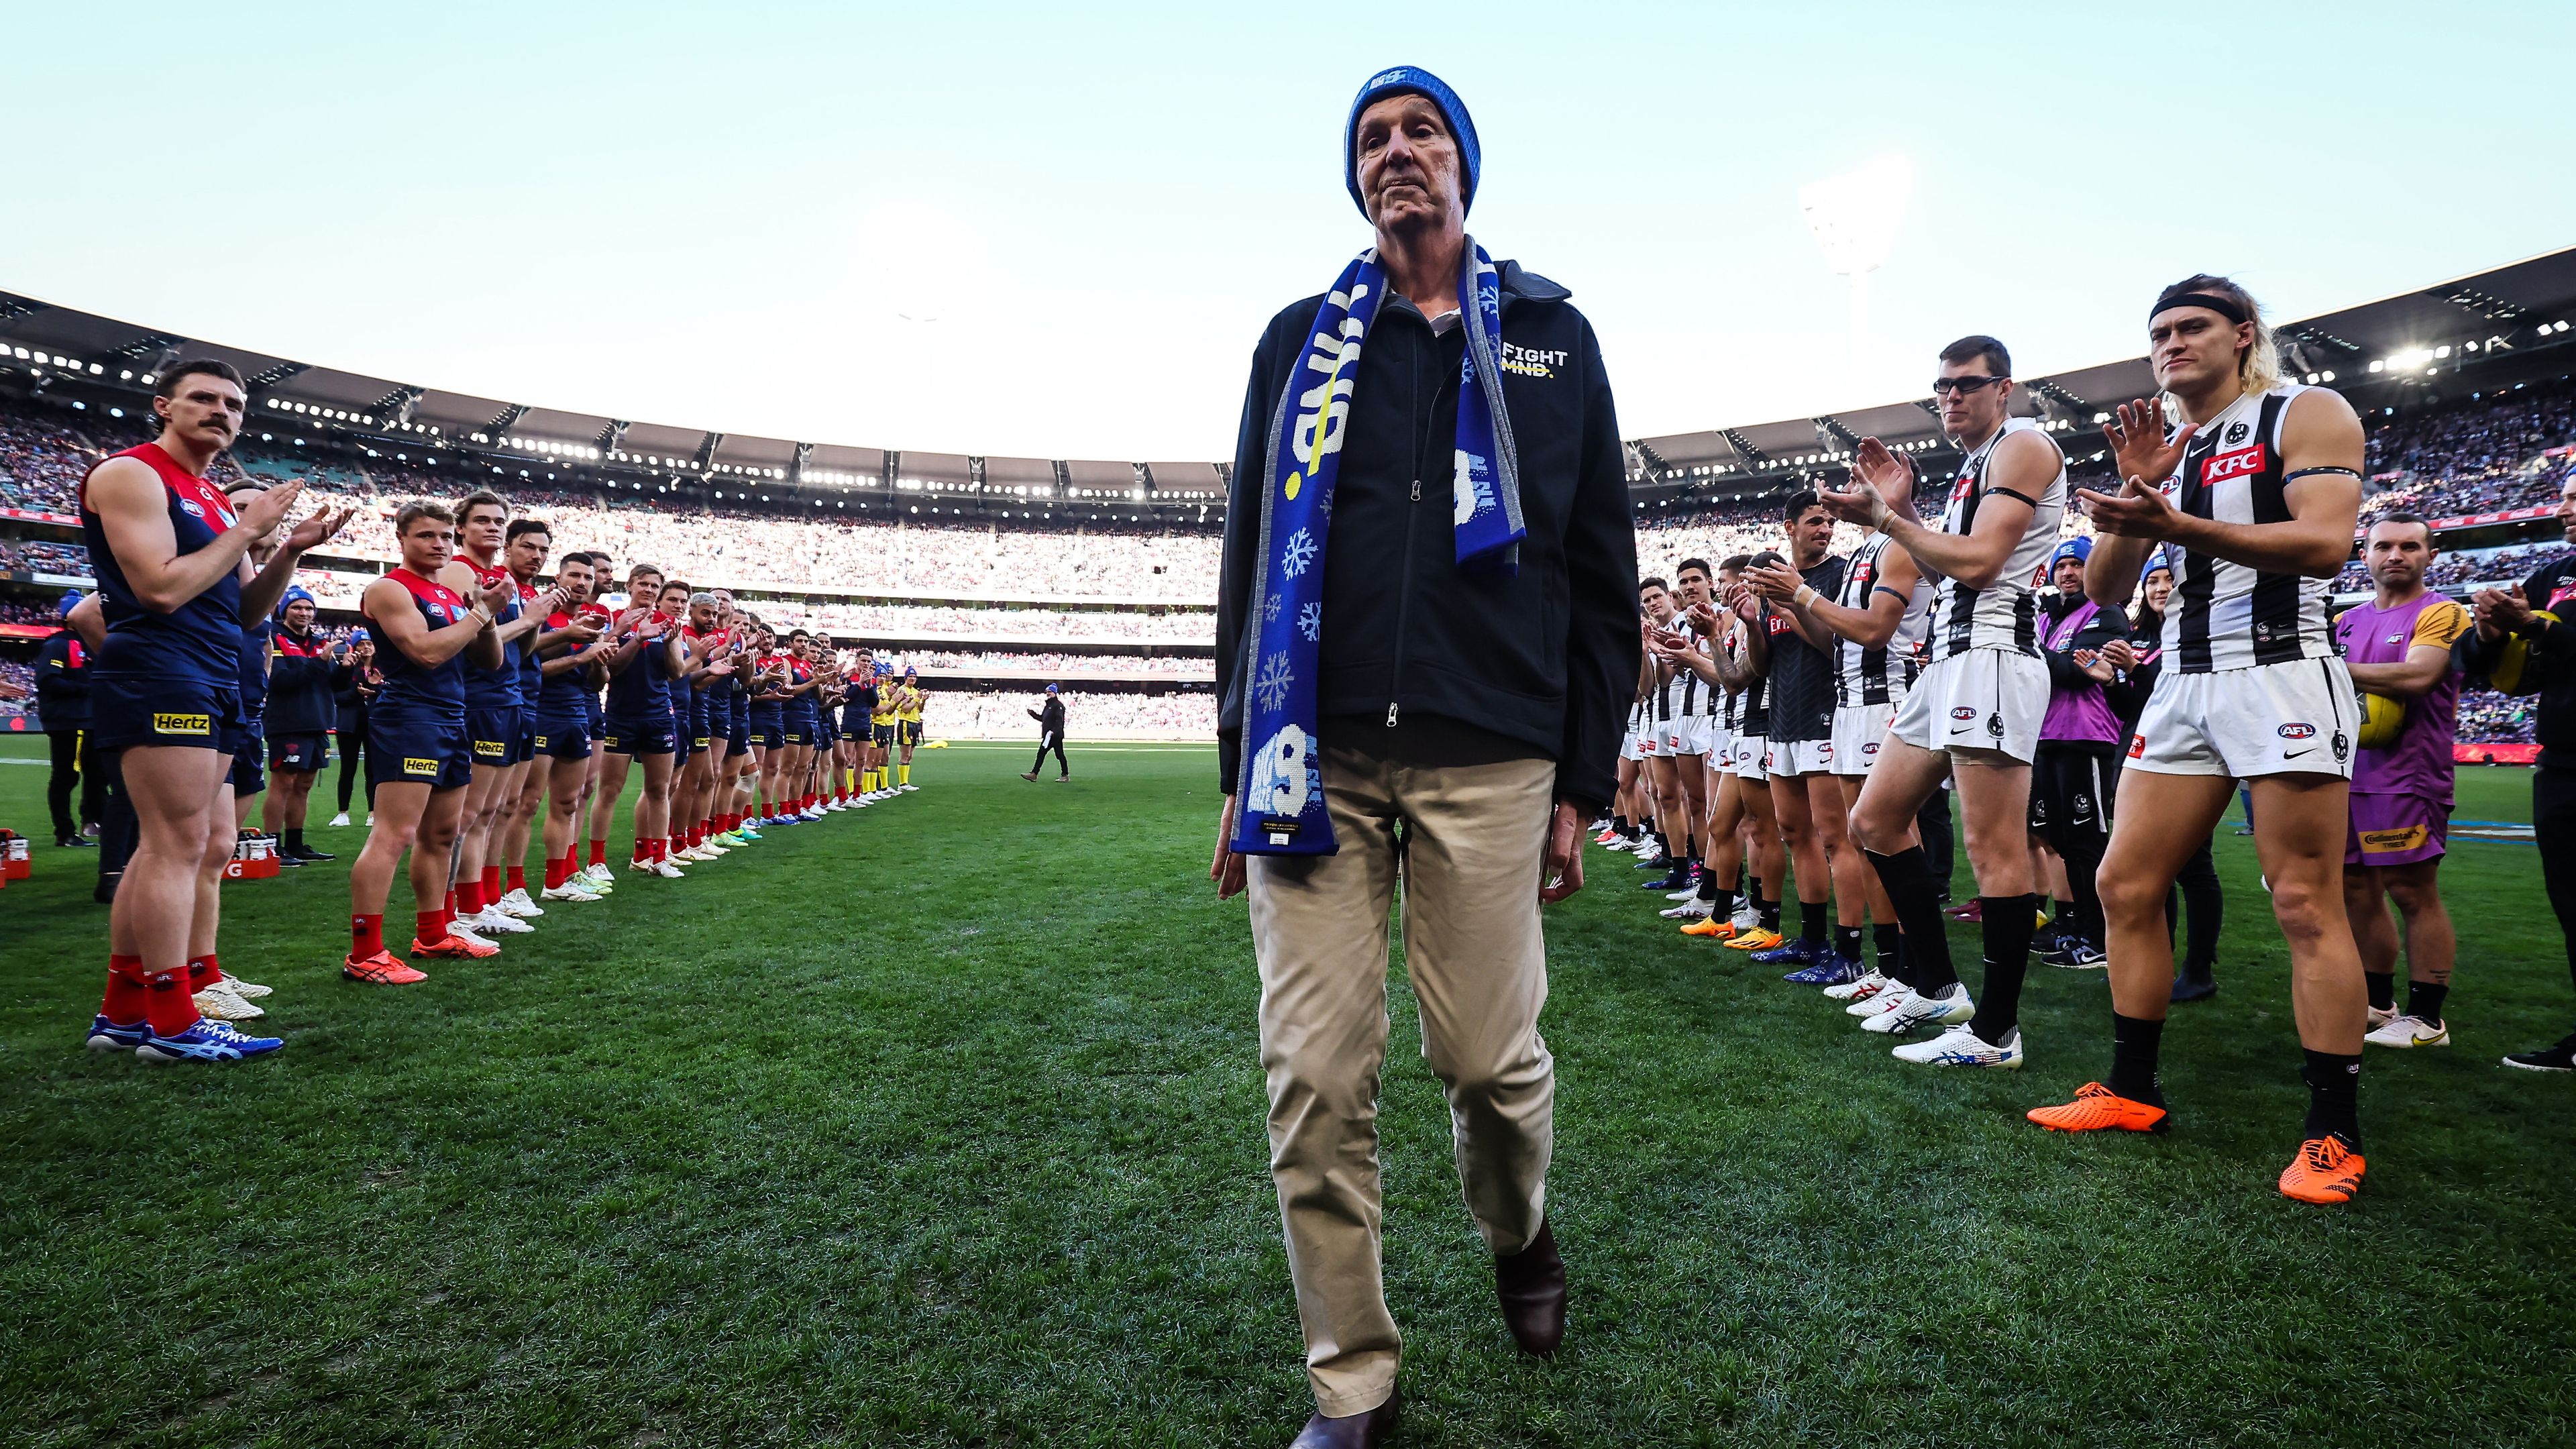 MELBOURNE, AUSTRALIA - JUNE 12: A guard of honour is formed for Neale Daniher during the 2023 AFL Round 13 match between the Melbourne Demons and the Collingwood Magpies at the Melbourne Cricket Ground on June 12, 2023 in Melbourne, Australia. (Photo by Dylan Burns/AFL Photos via Getty Images)